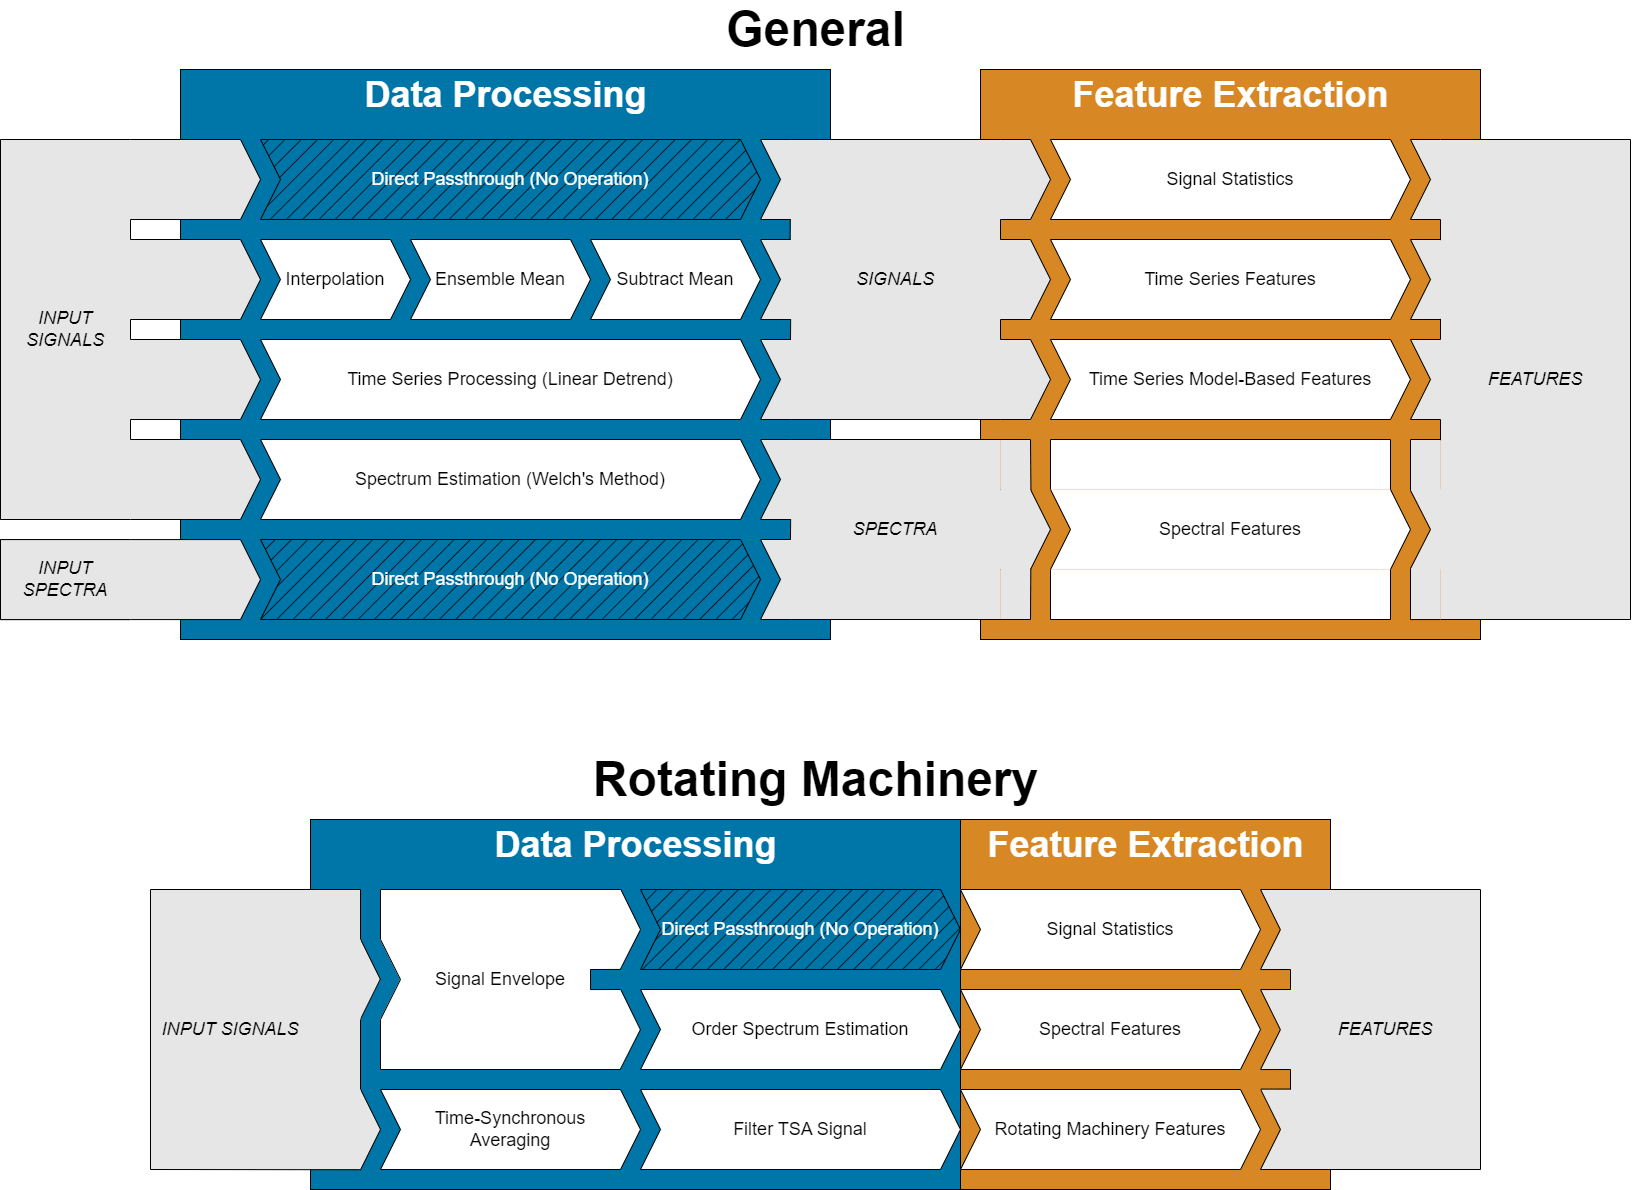 The flow for general features is on the top. The flow for rotating machinery features is on the bottom. The basic computation for both types of feature is, from left to right: inputs, data processing, feature extraction, features.